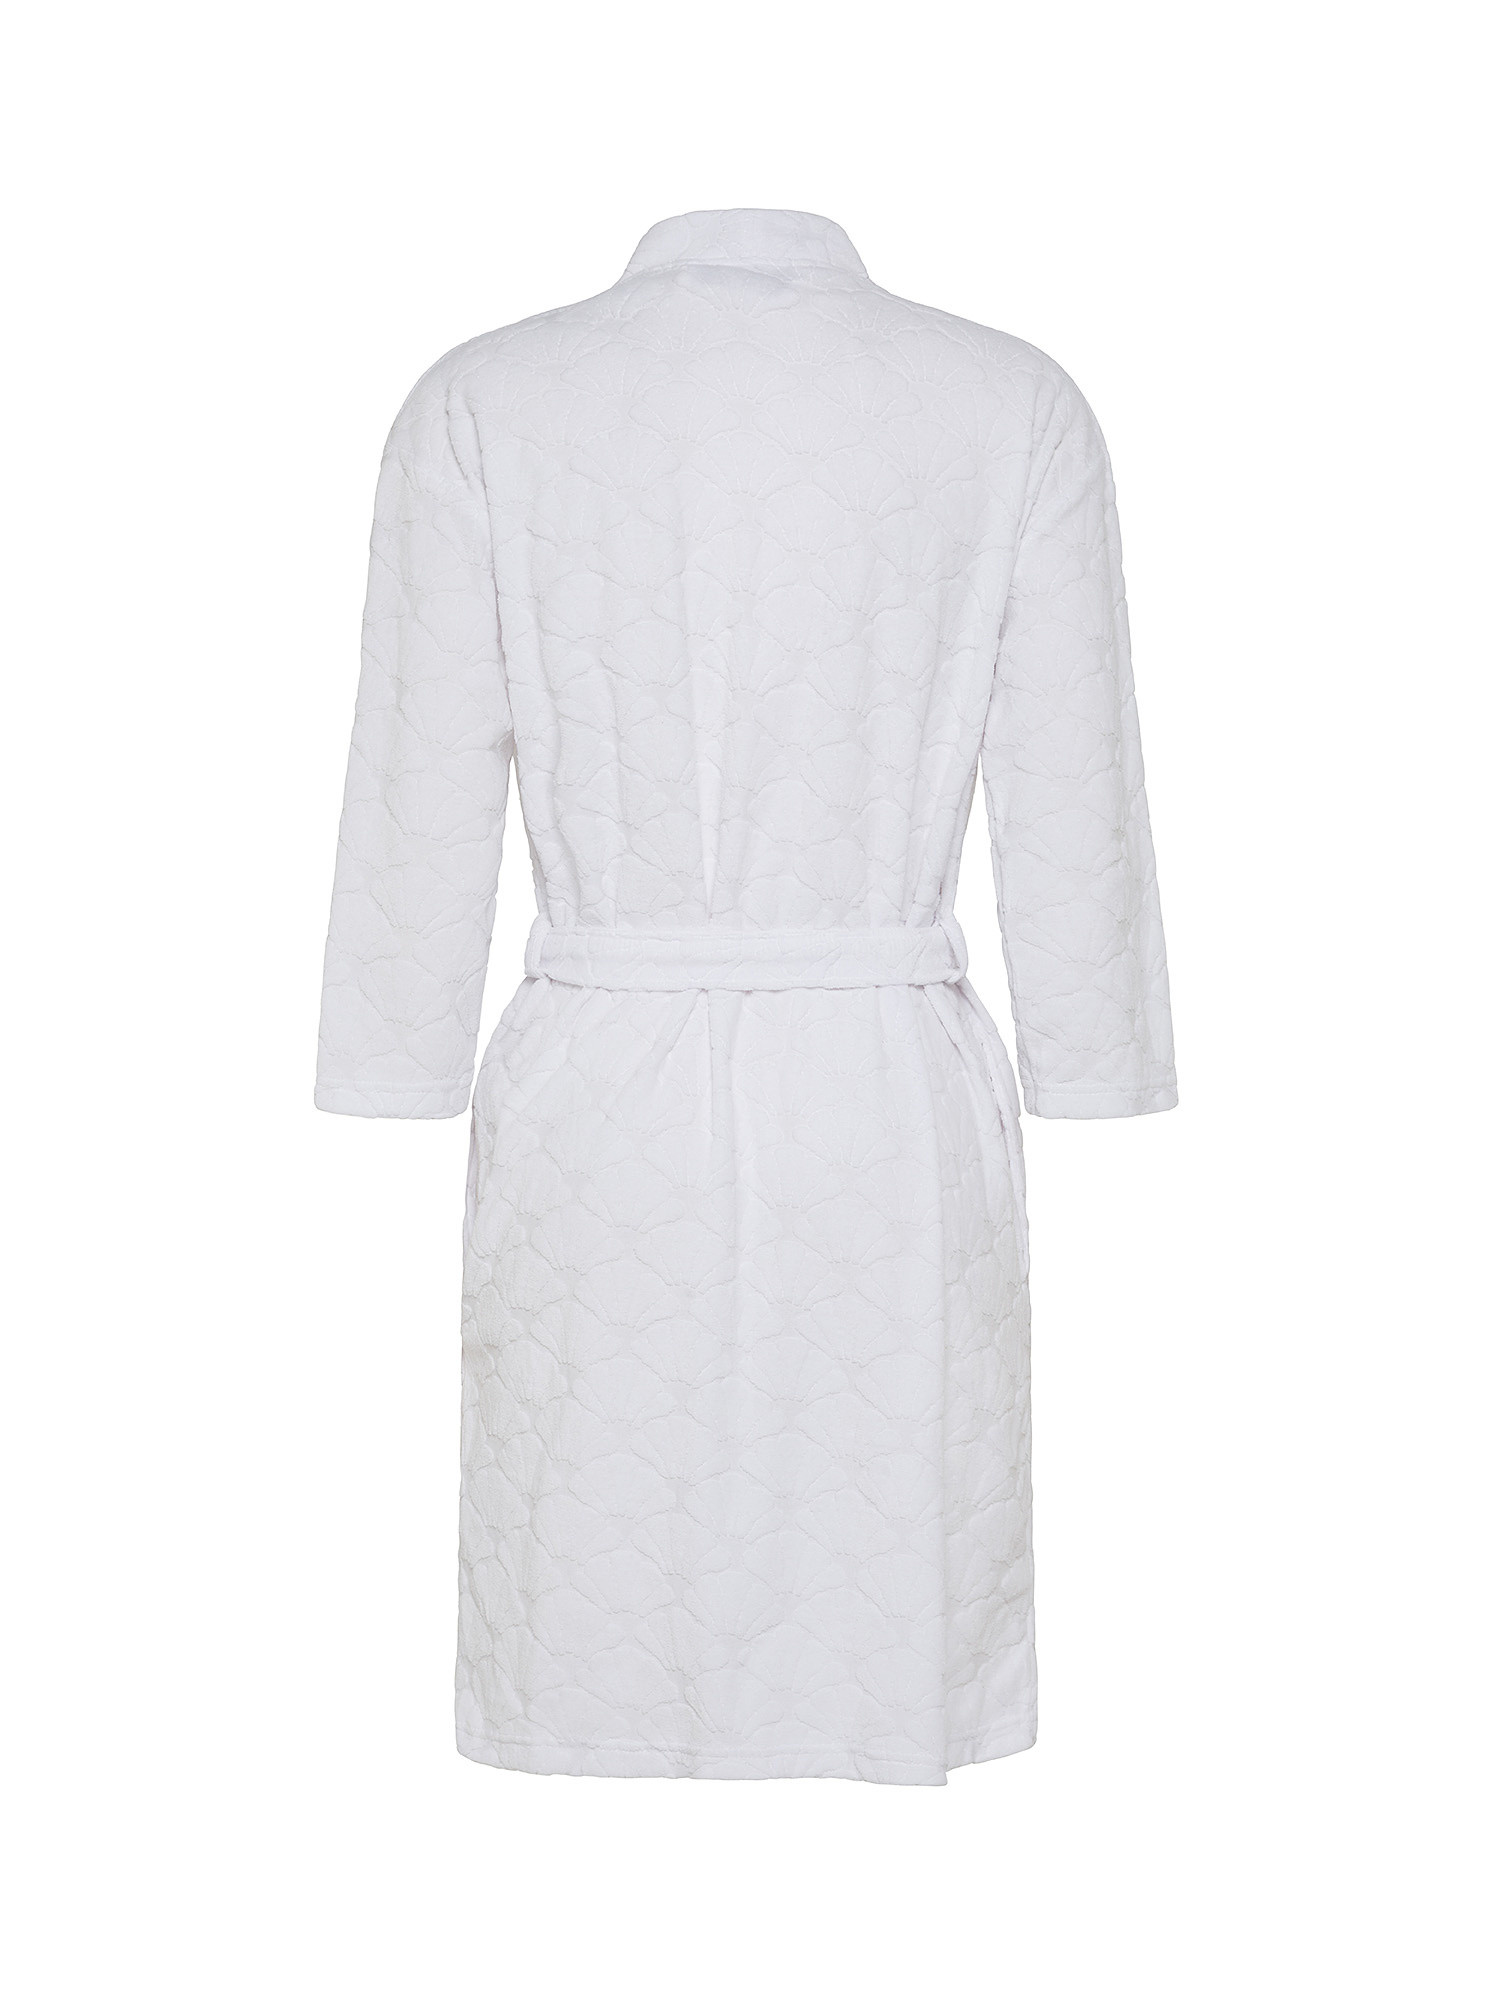 Terry cotton dressing gown with fans motif, White, large image number 1